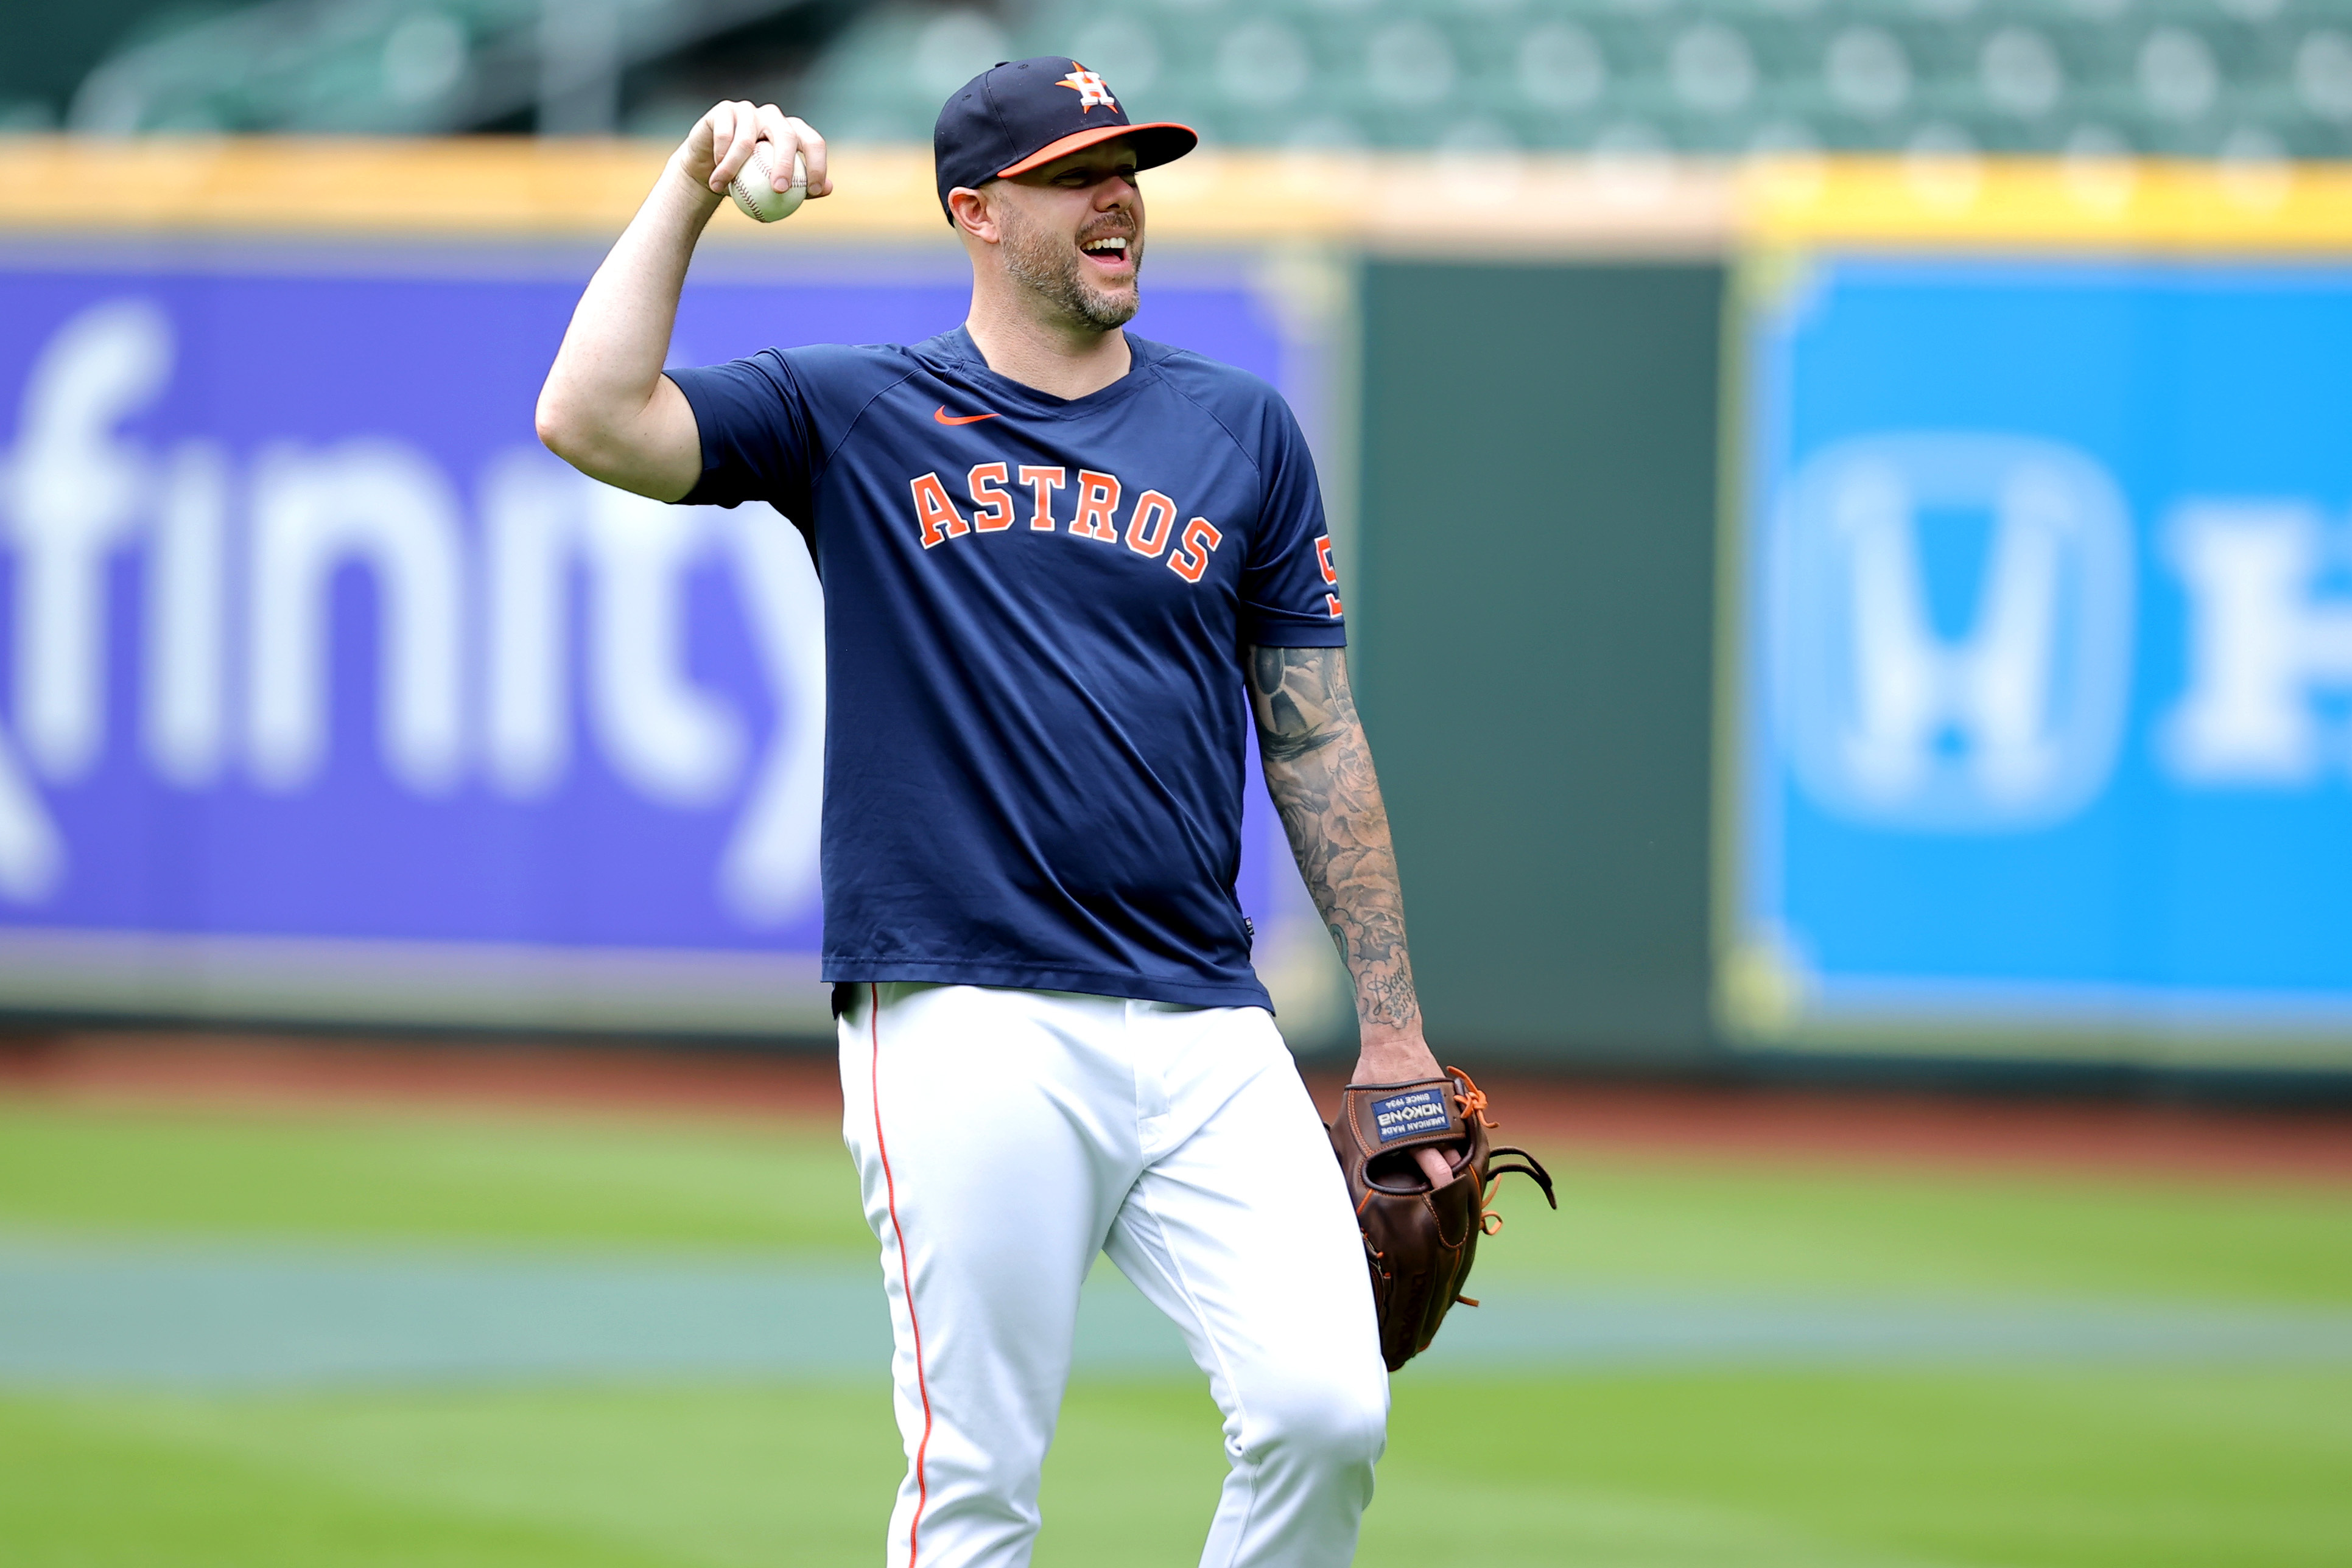 Houston Astros option Meyers, call up Matijevic, Diaz, Brown